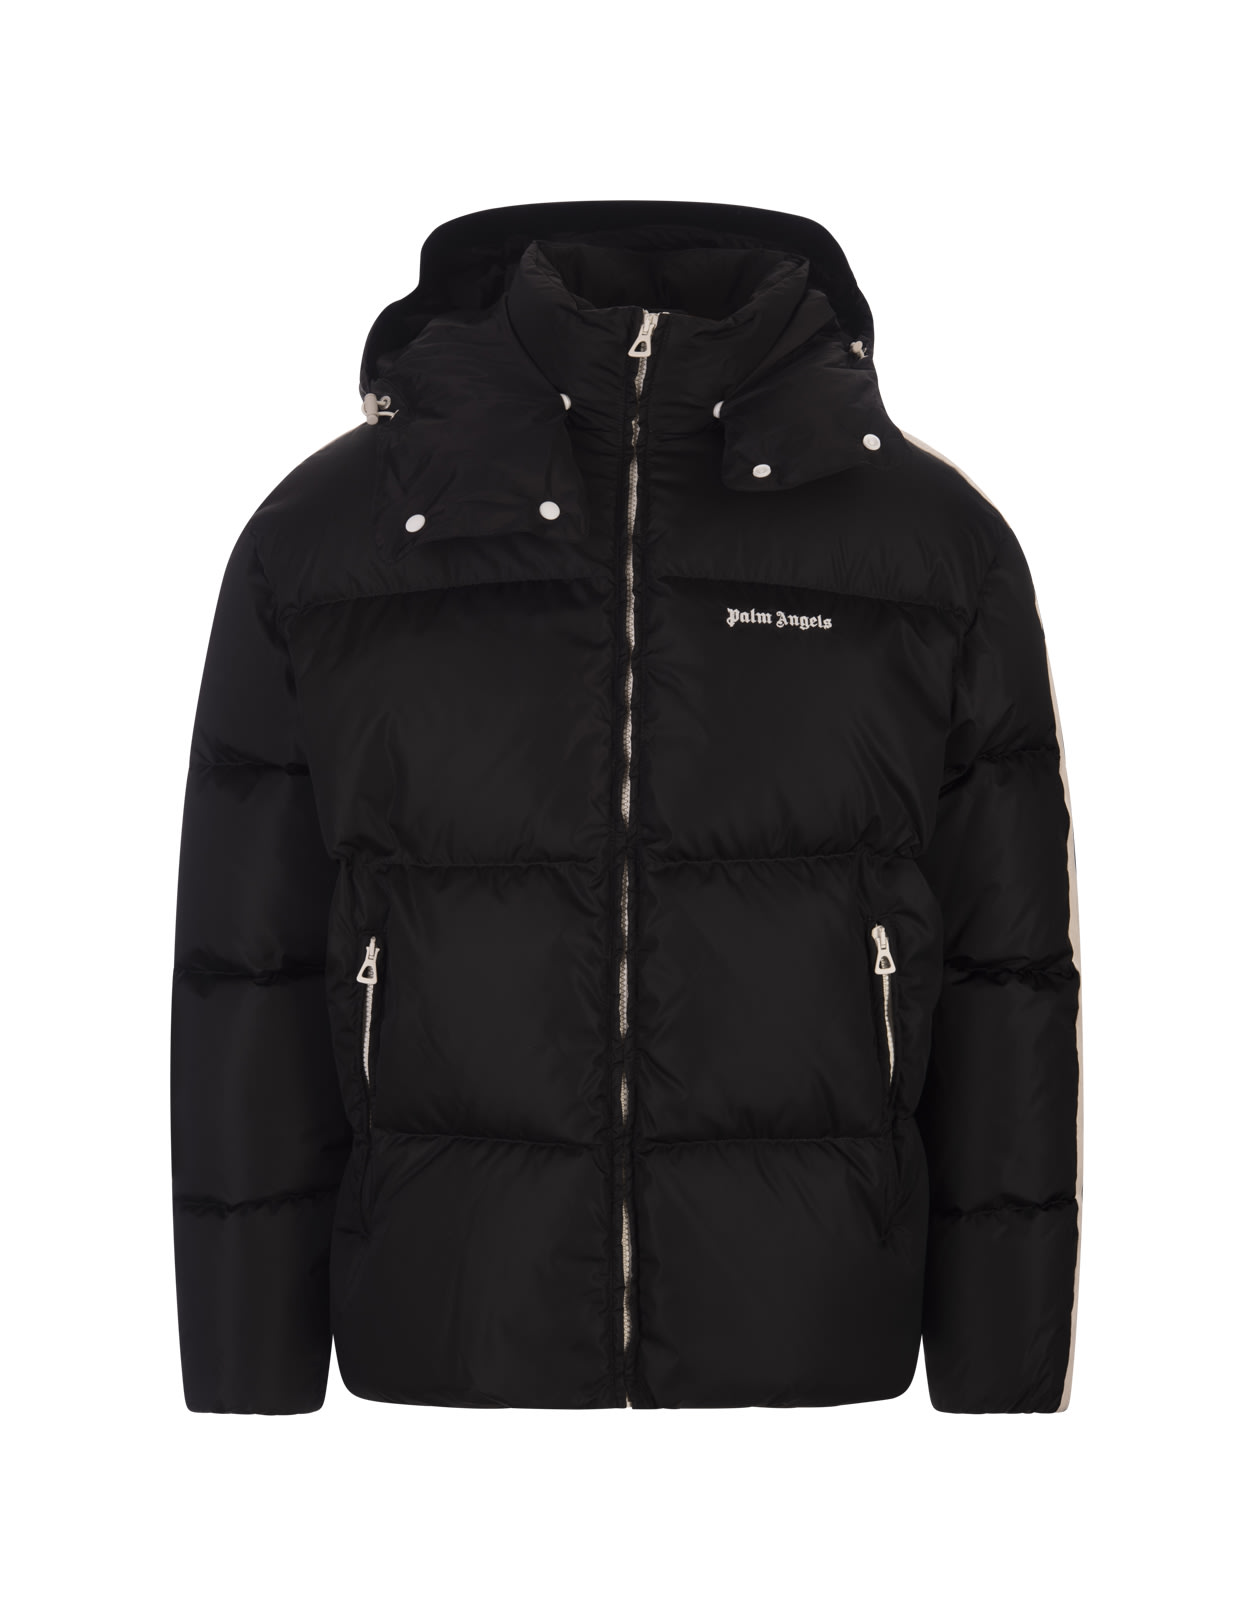 Palm Angels Black Down Jacket With Logo And Contrast Bands